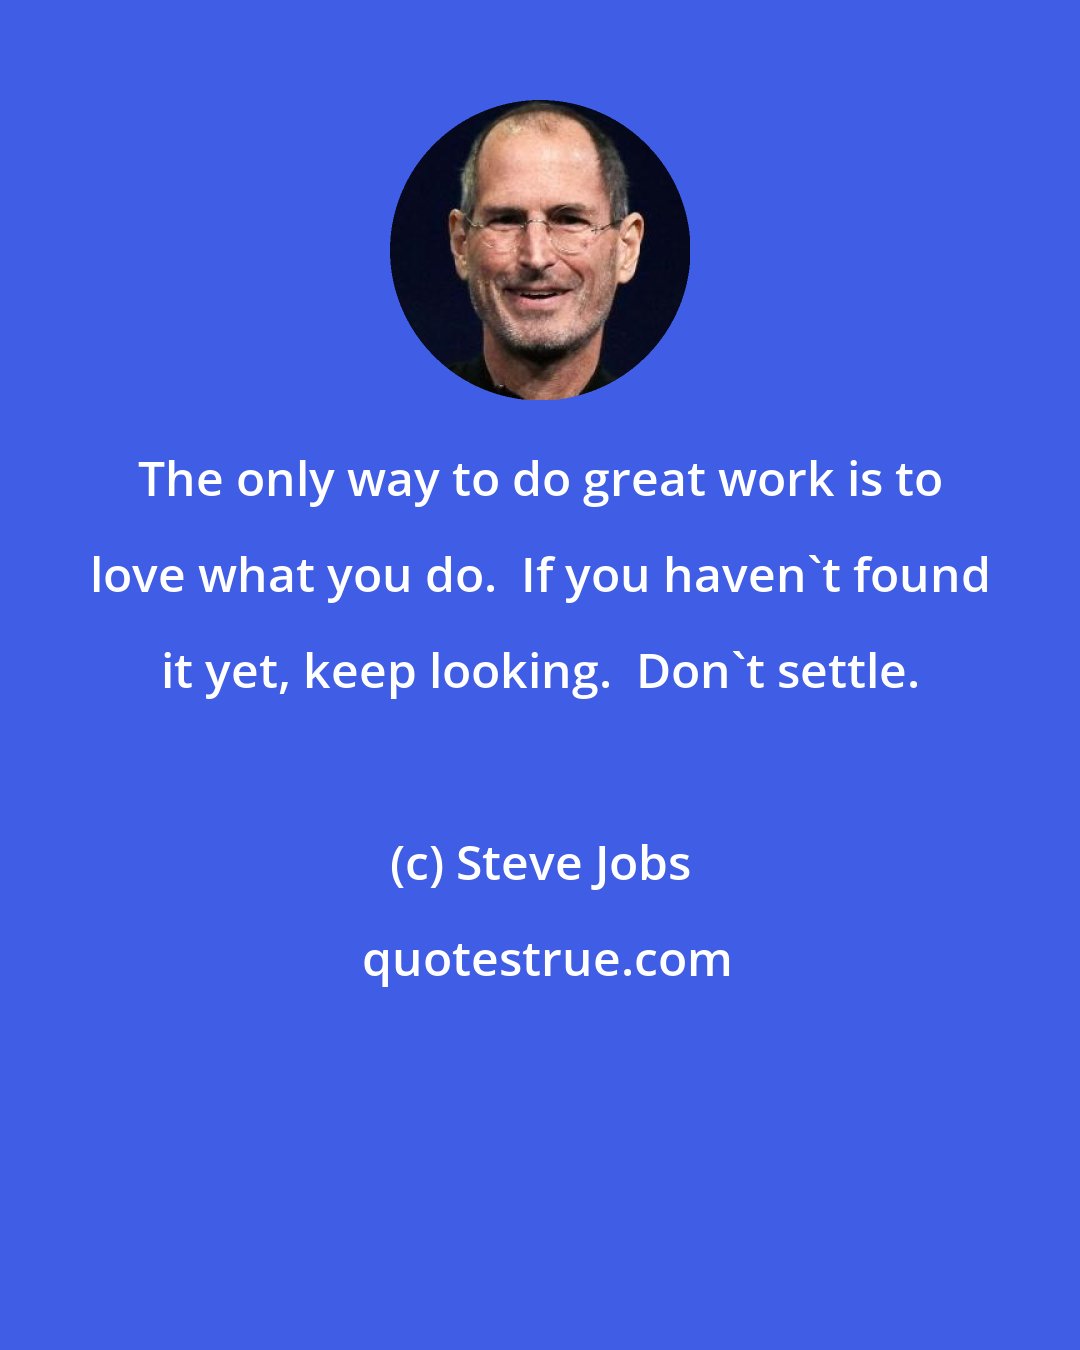 Steve Jobs: The only way to do great work is to love what you do.  If you haven't found it yet, keep looking.  Don't settle.